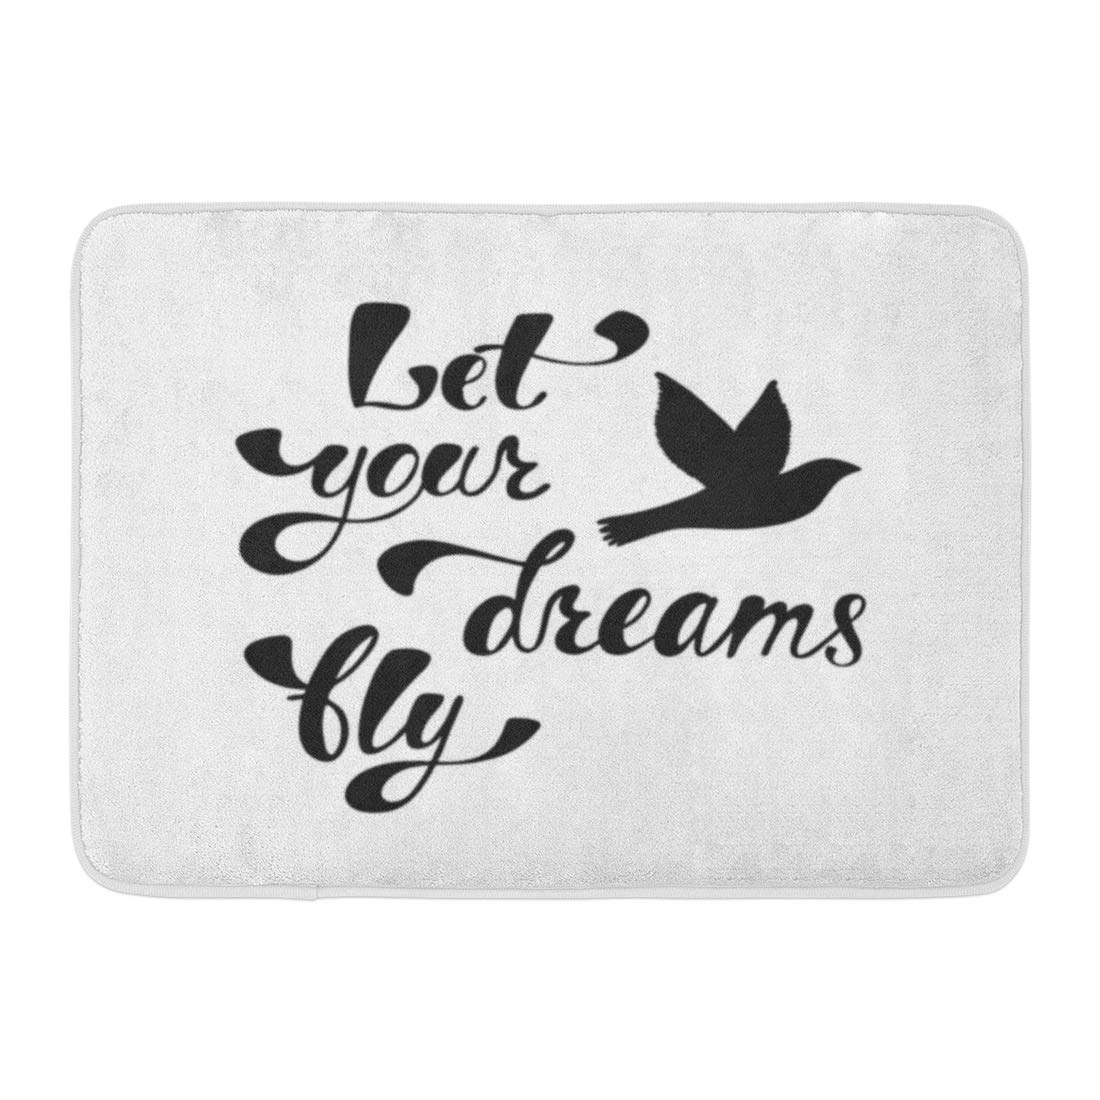 GODPOK Let Your Dreams Fly Inspirational Quote About Freedom Hand Lettered Phrase with Flying Bird Lettering Rug Doormat Bath Mat 23.6x15.7 inch - image 1 of 1